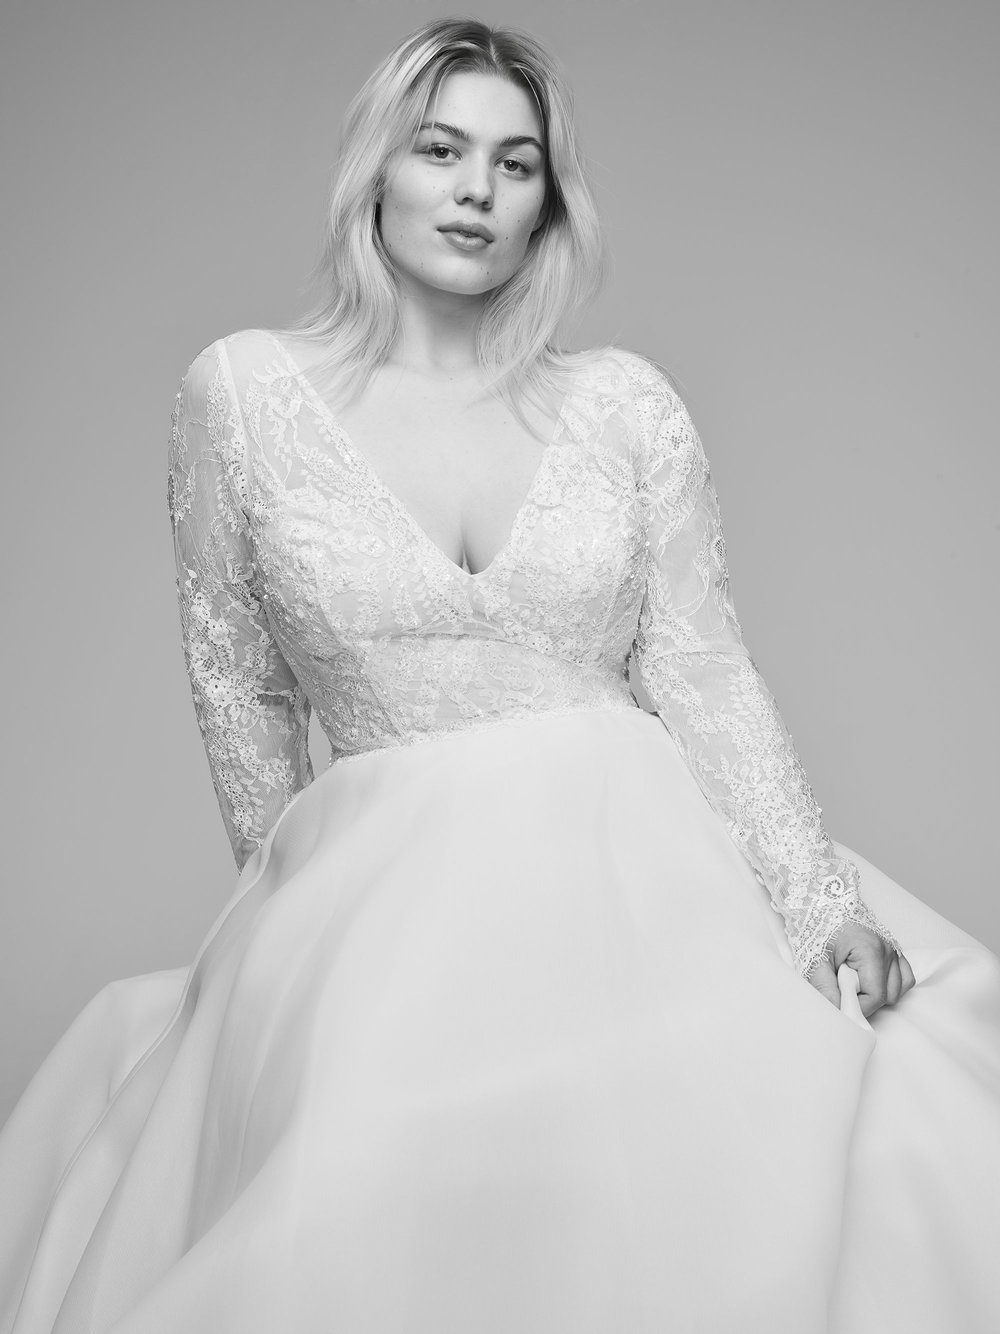 The Chrissy Plus size wedding gown from Curve Couture by Anne Barge